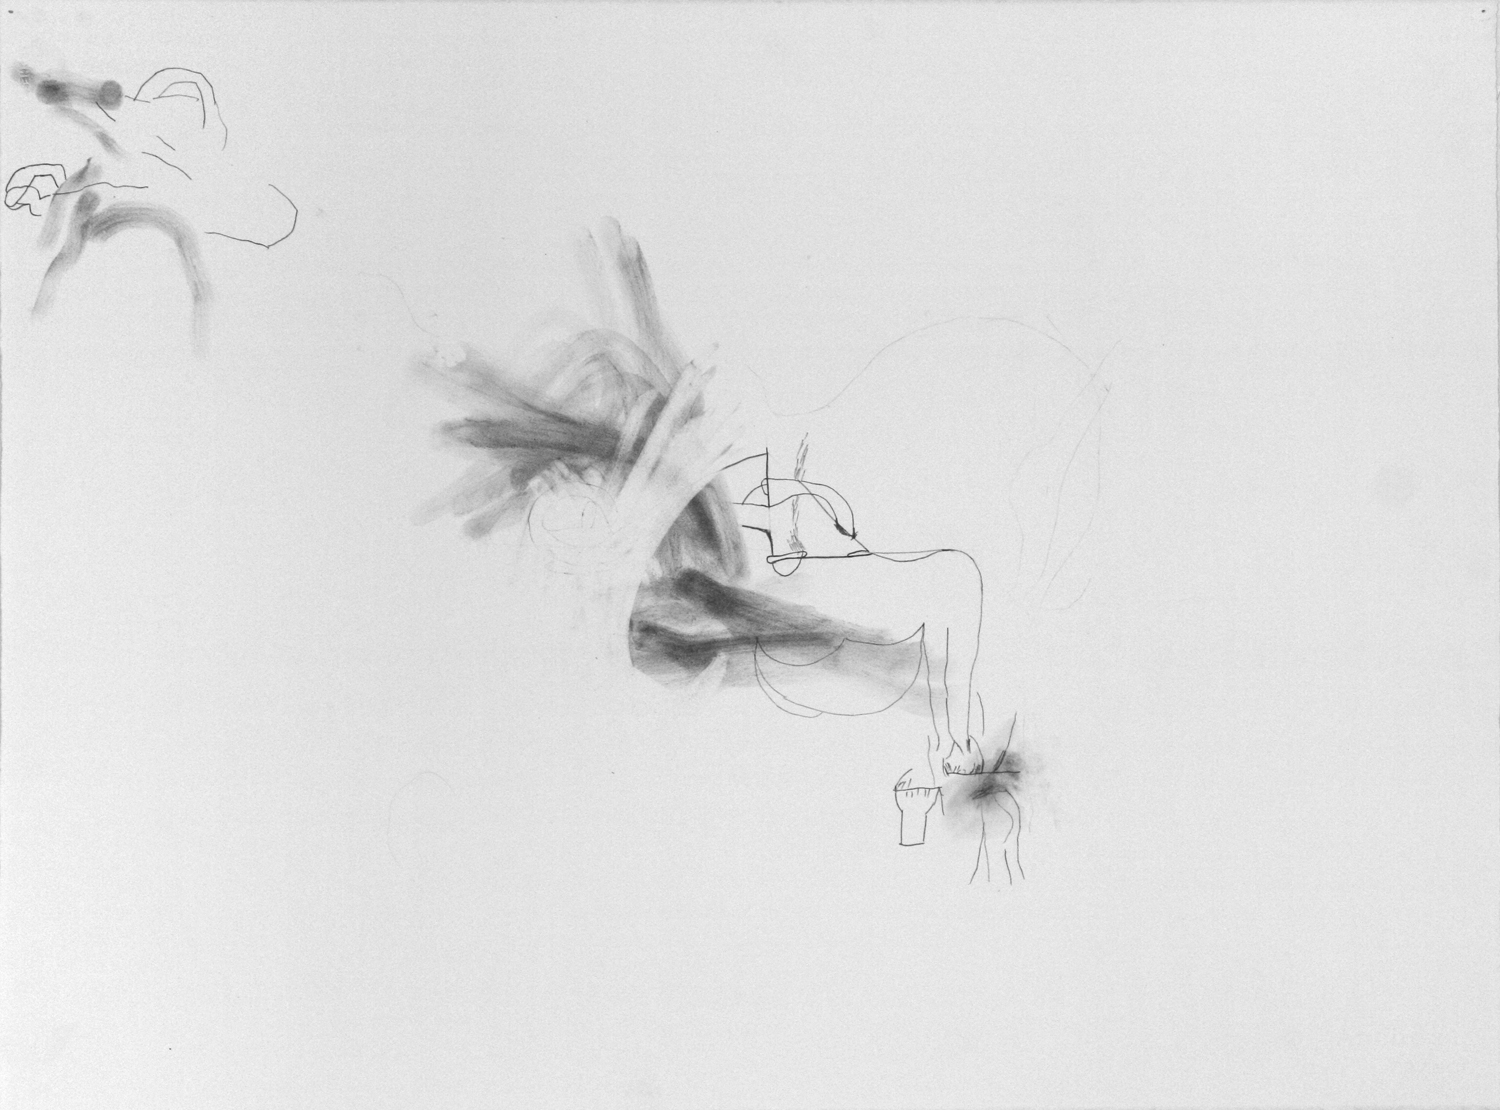  Untitled, 2013. 22" x 30", pencil on paper. 